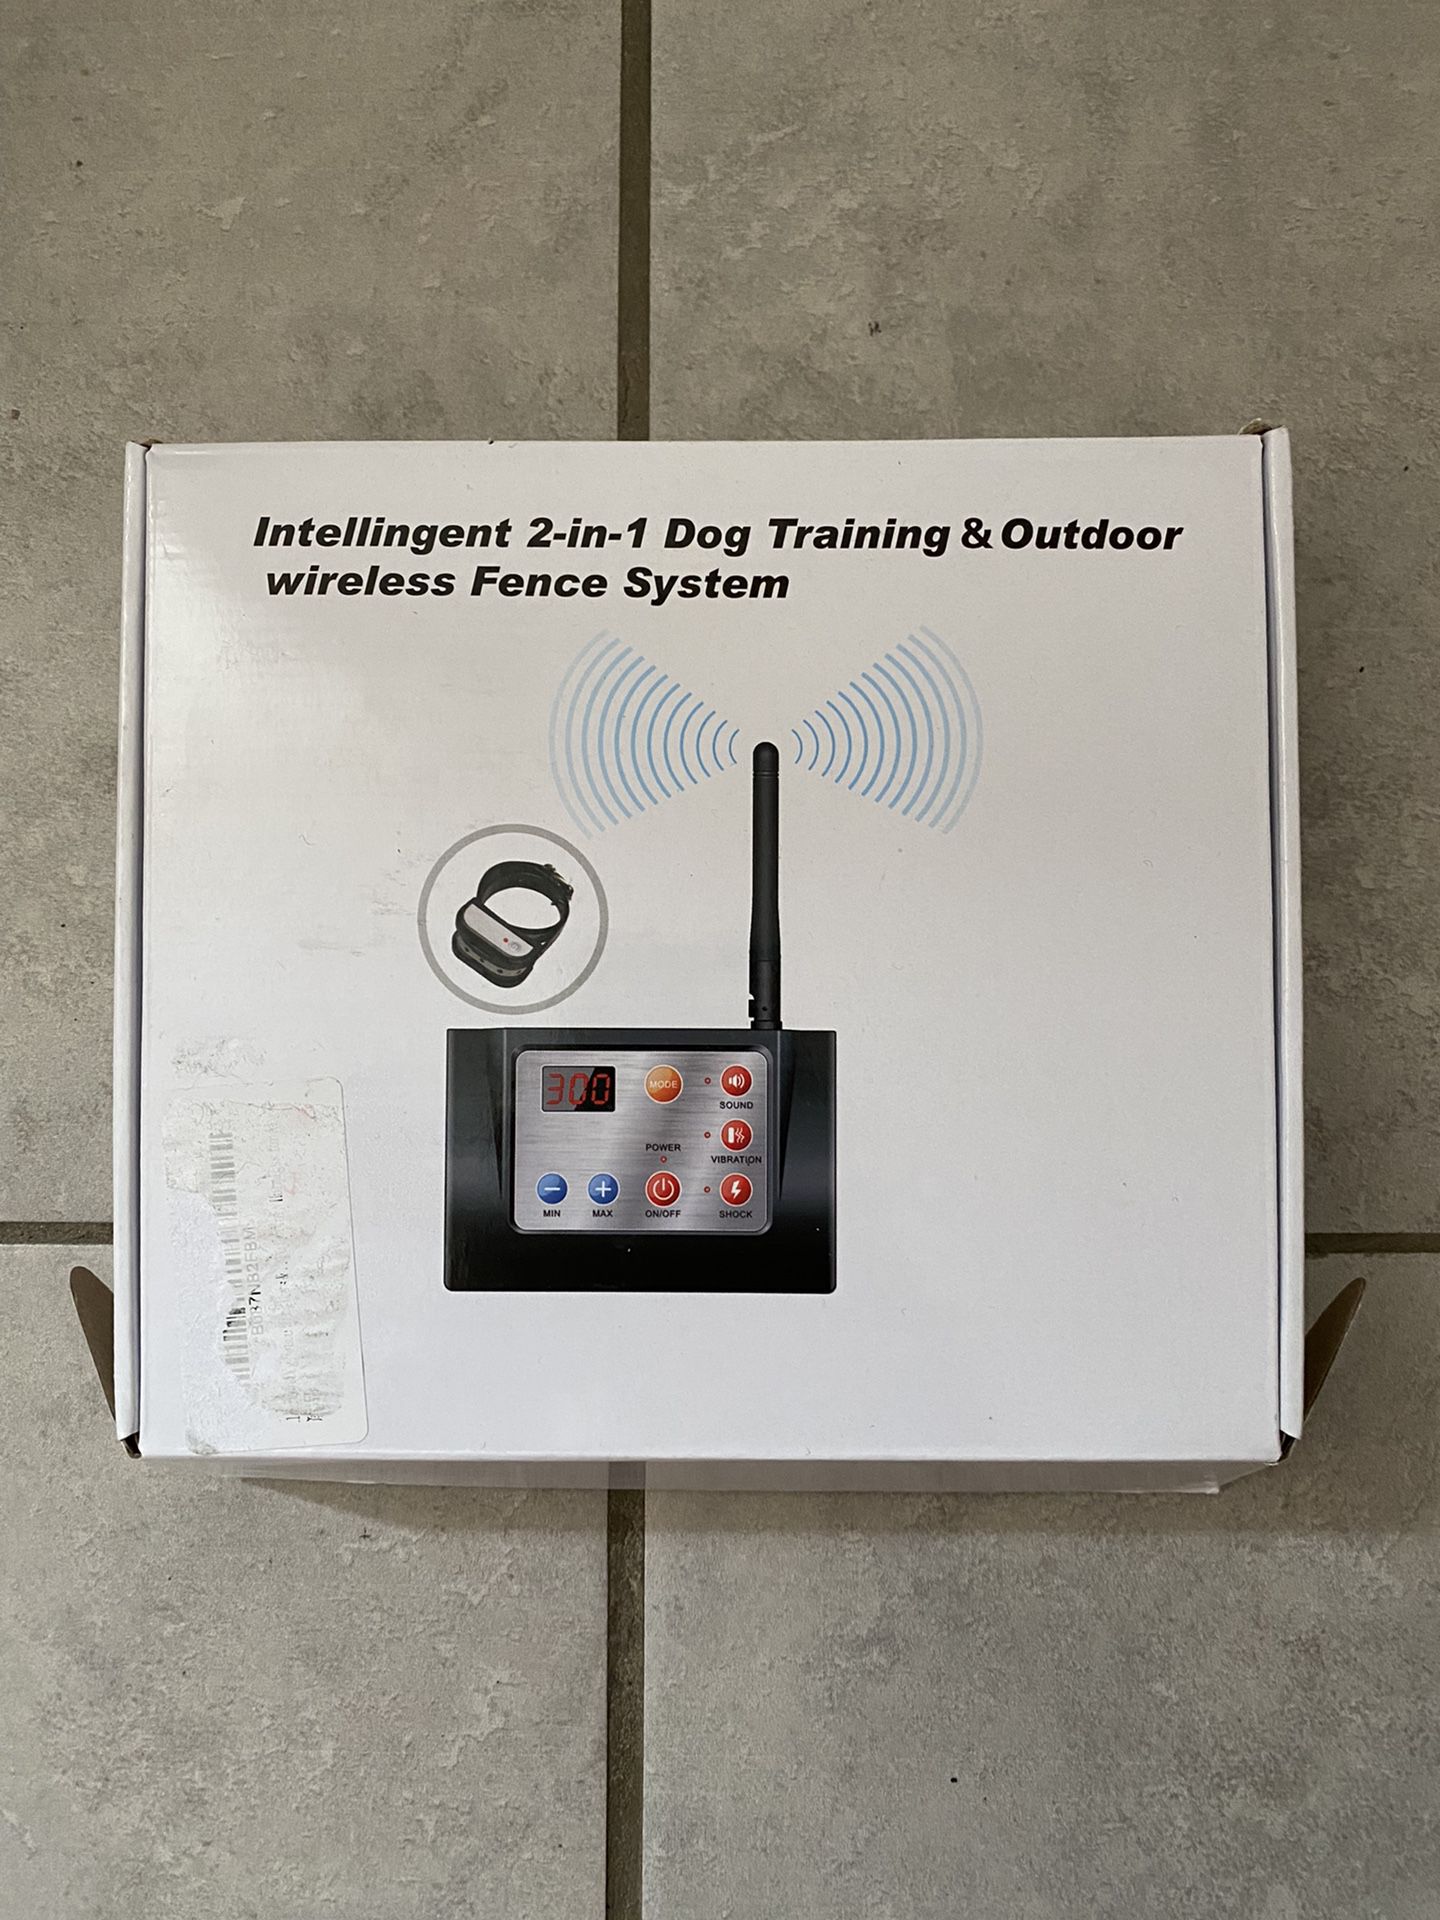 Intelligent 2-in-1 Dog Training & Outdoor Wireless Fence System